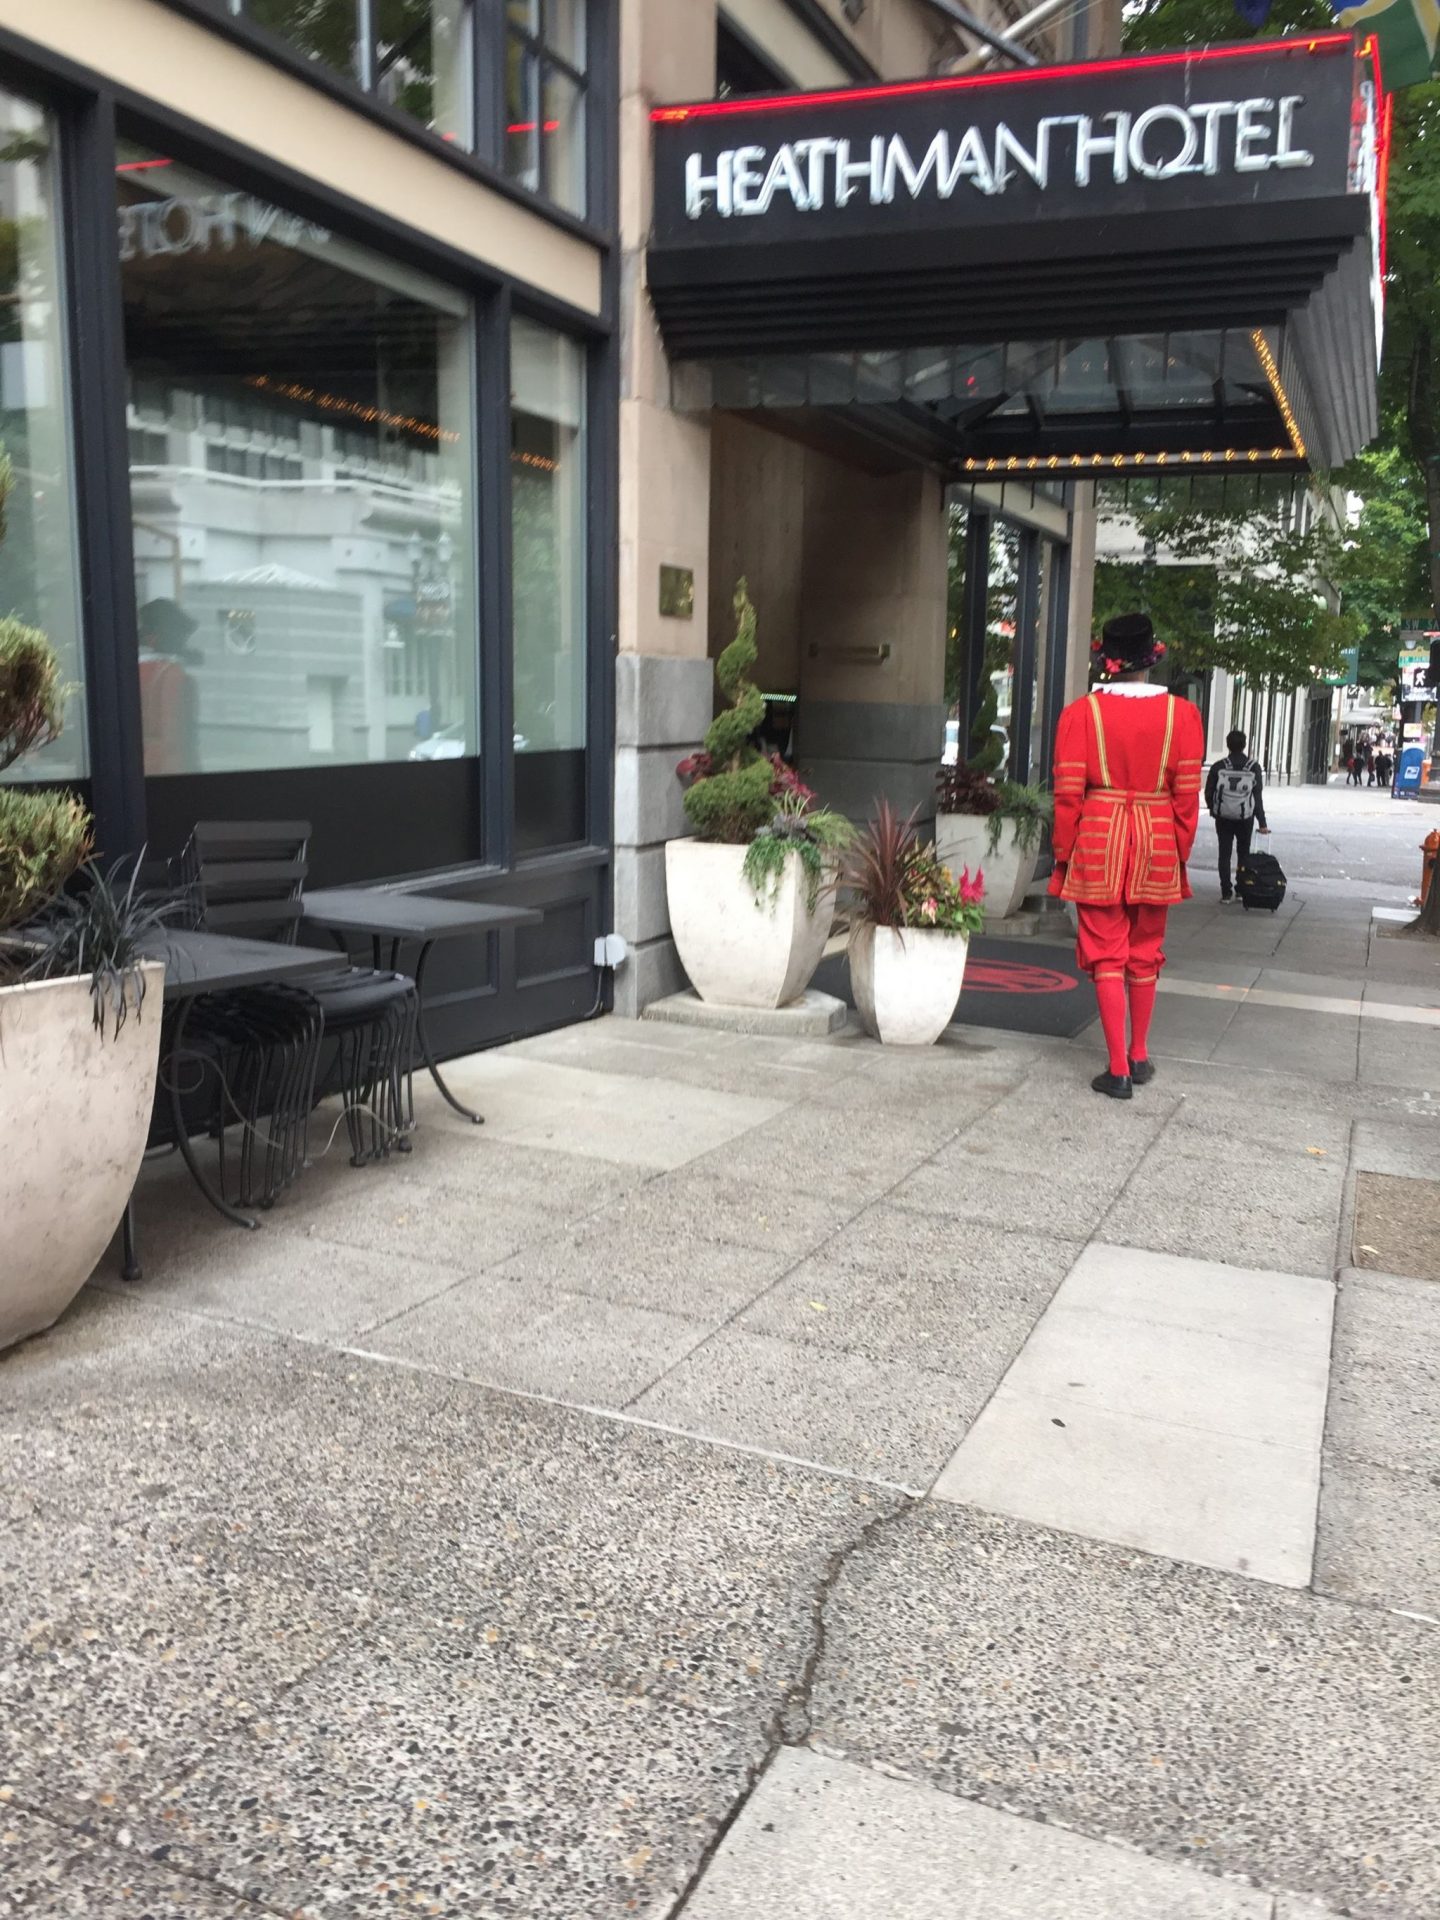 Beefeater at a hotel in Portland, Oregon